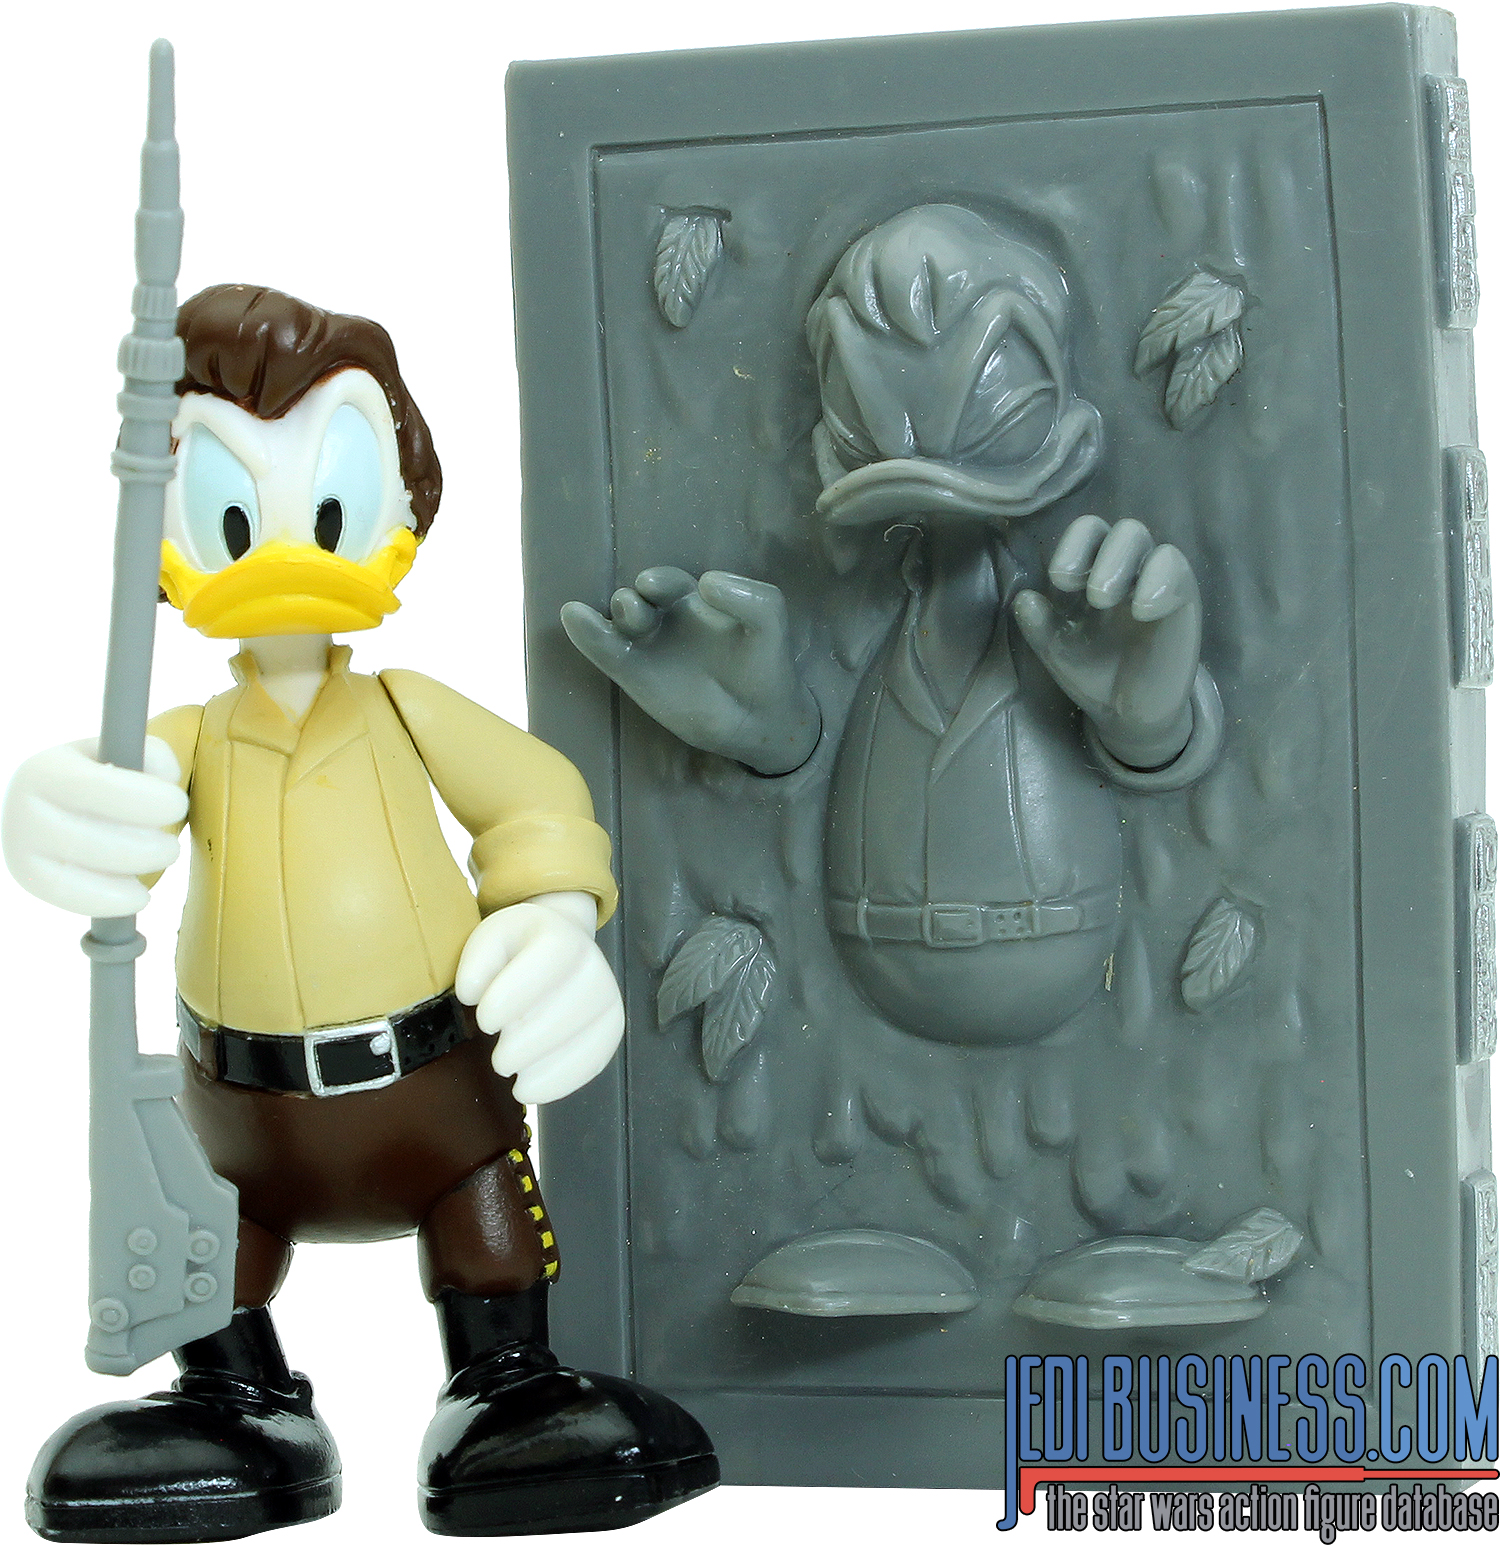 Donald Duck Series 4 - Donald Duck As Han Solo In Carbonite